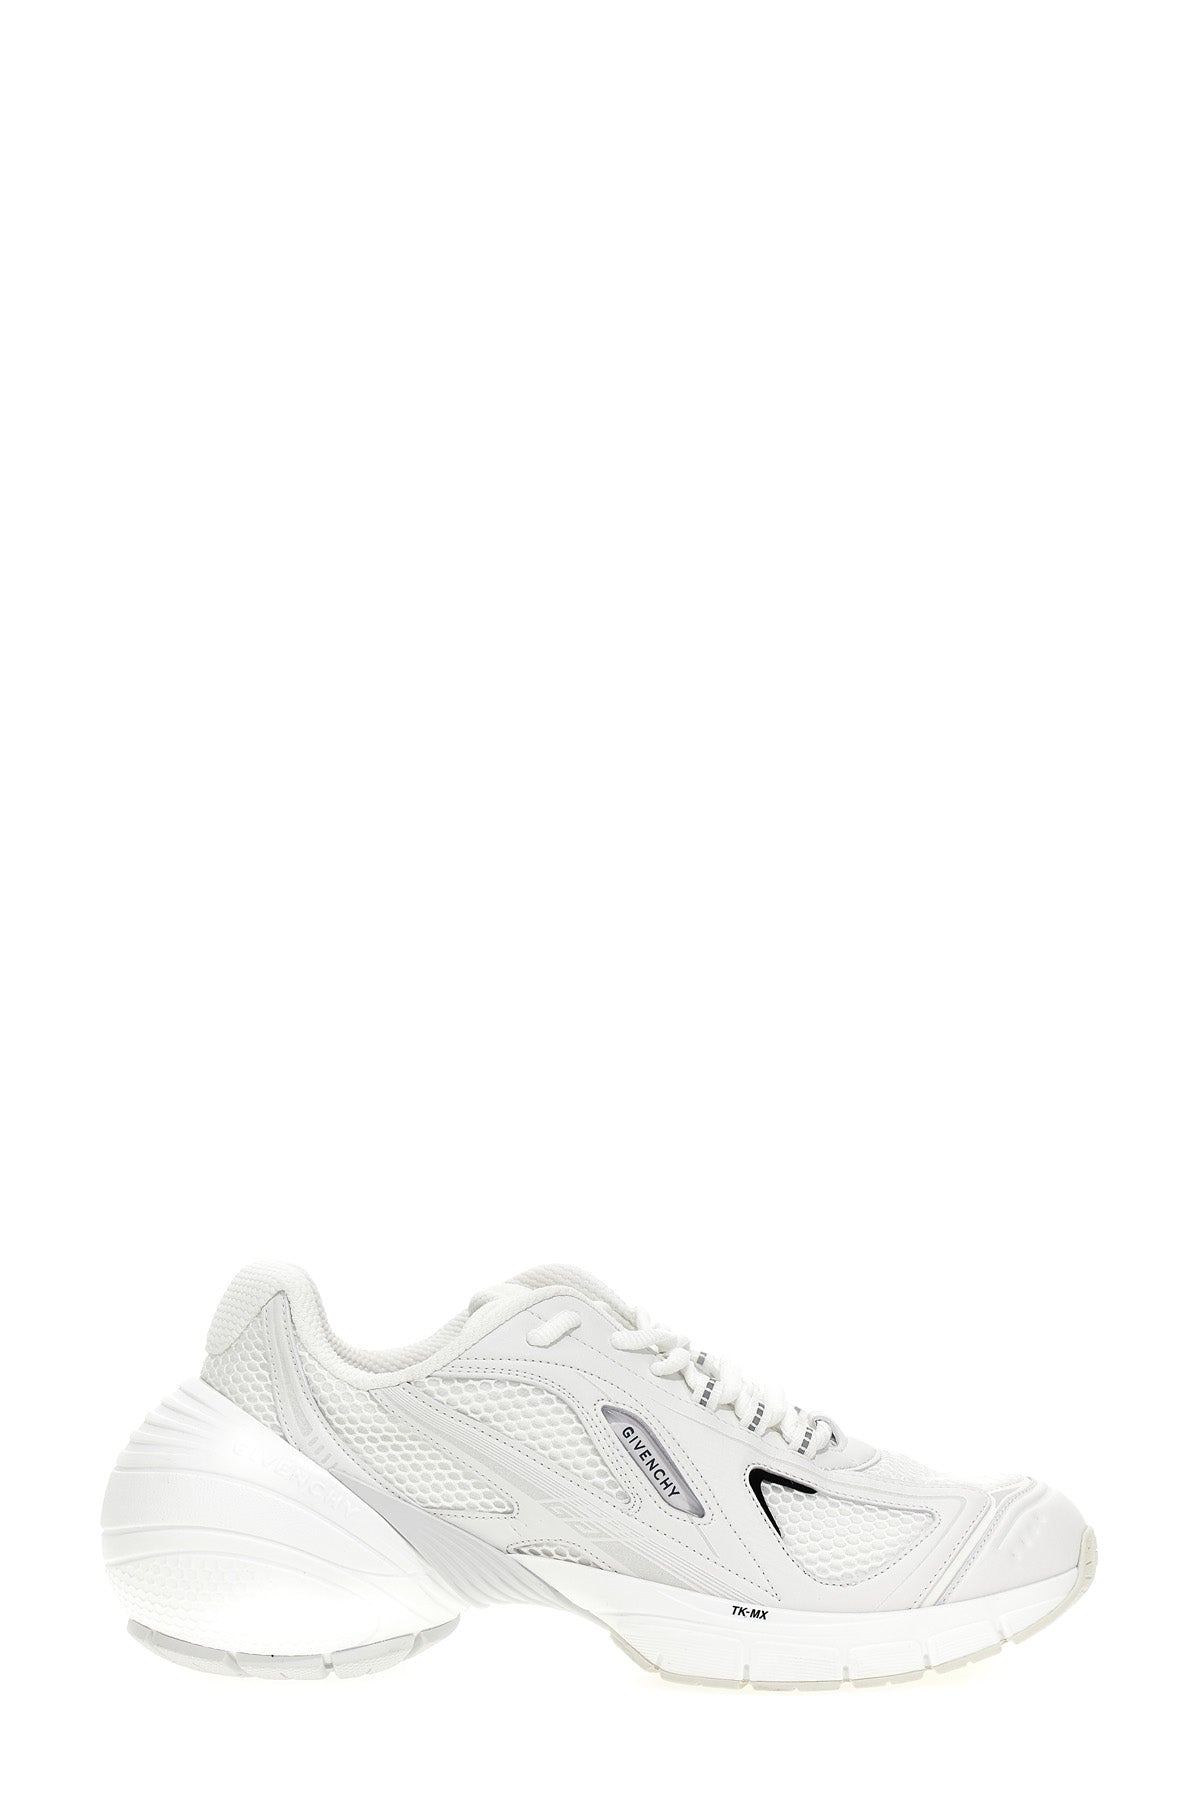 GIVENCHY TK-MX RUNNER SNEAKERS